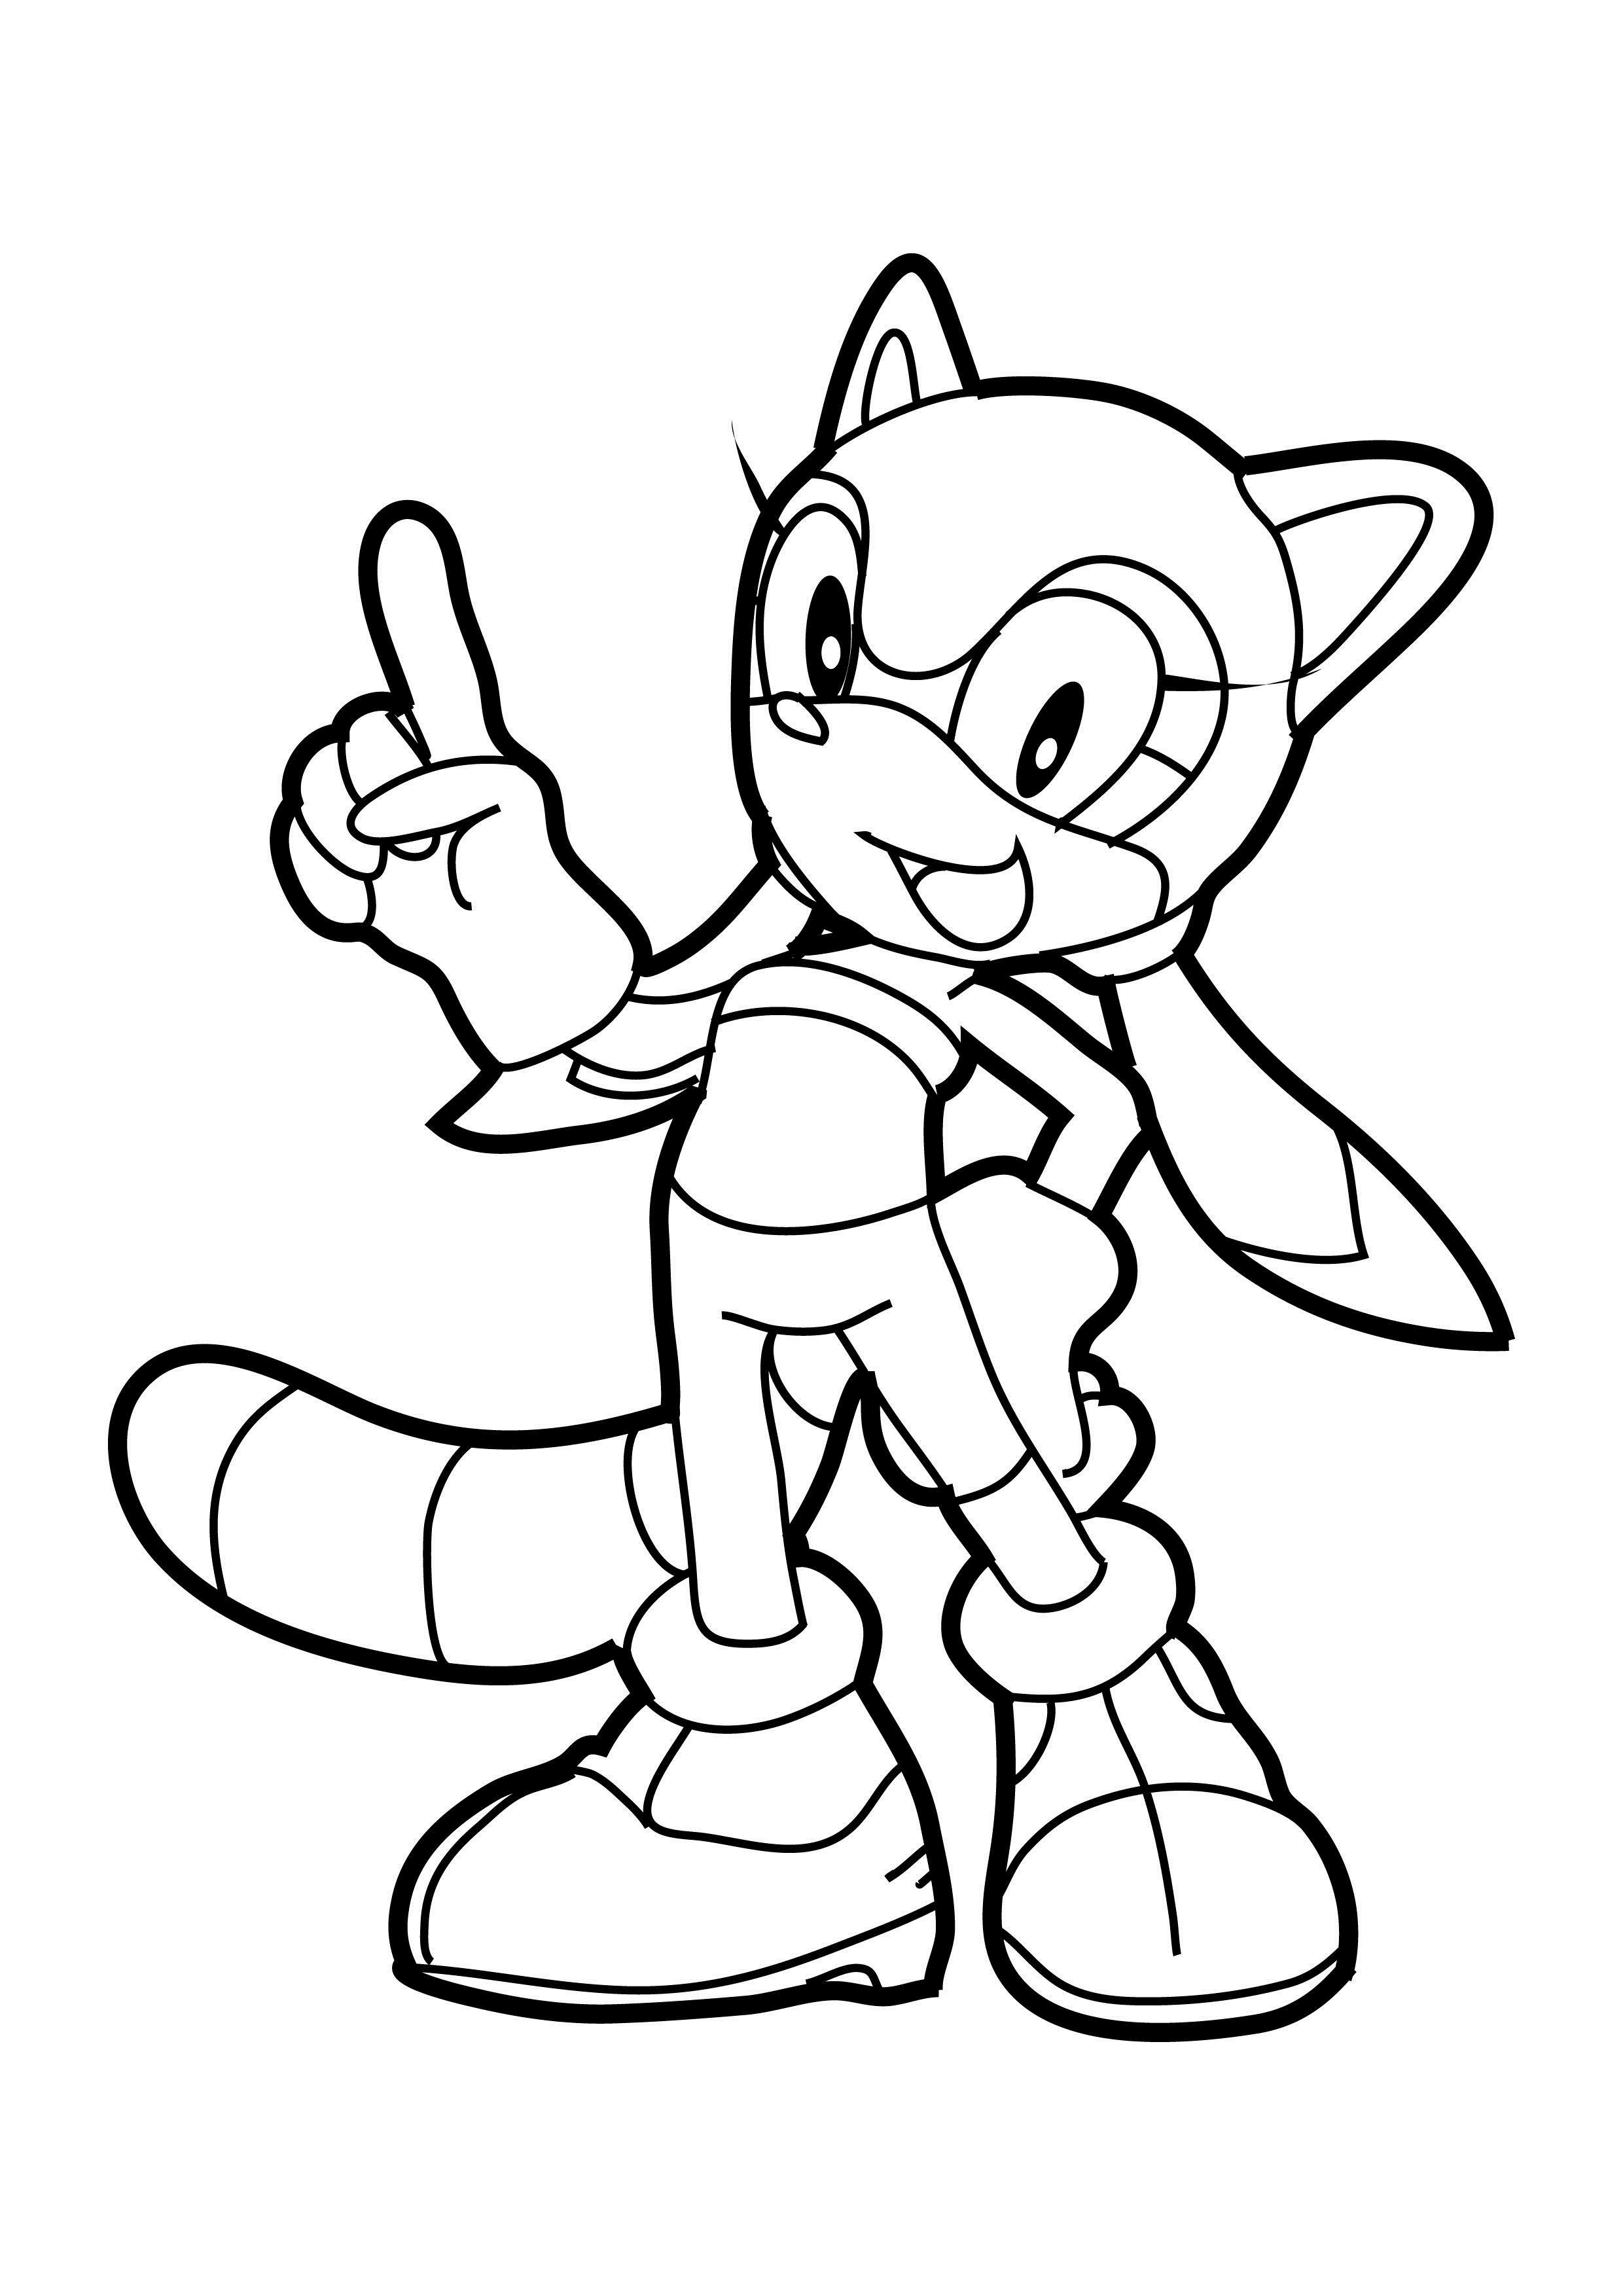 Coloring page: Sonic (Video Games) #153882 - Printable coloring pages